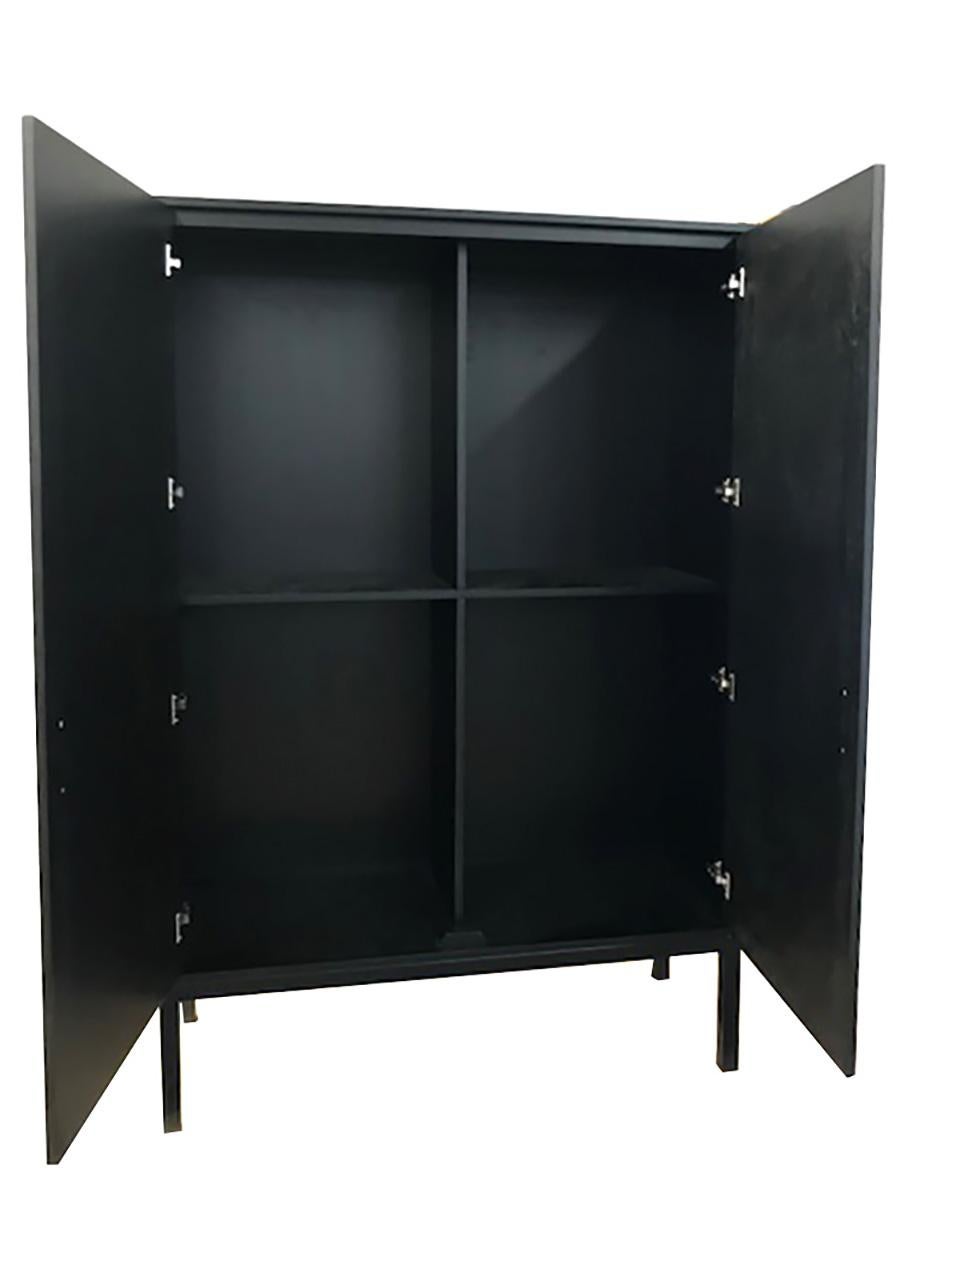 Our  Hudson Cabinet is designed and finished in our Toronto studio, Morgan Clayhall.

The construction consists of walnut body/doors, sitting on a steel base that has been powdered coated matte black.  The artwork on the doors is mix medium and are